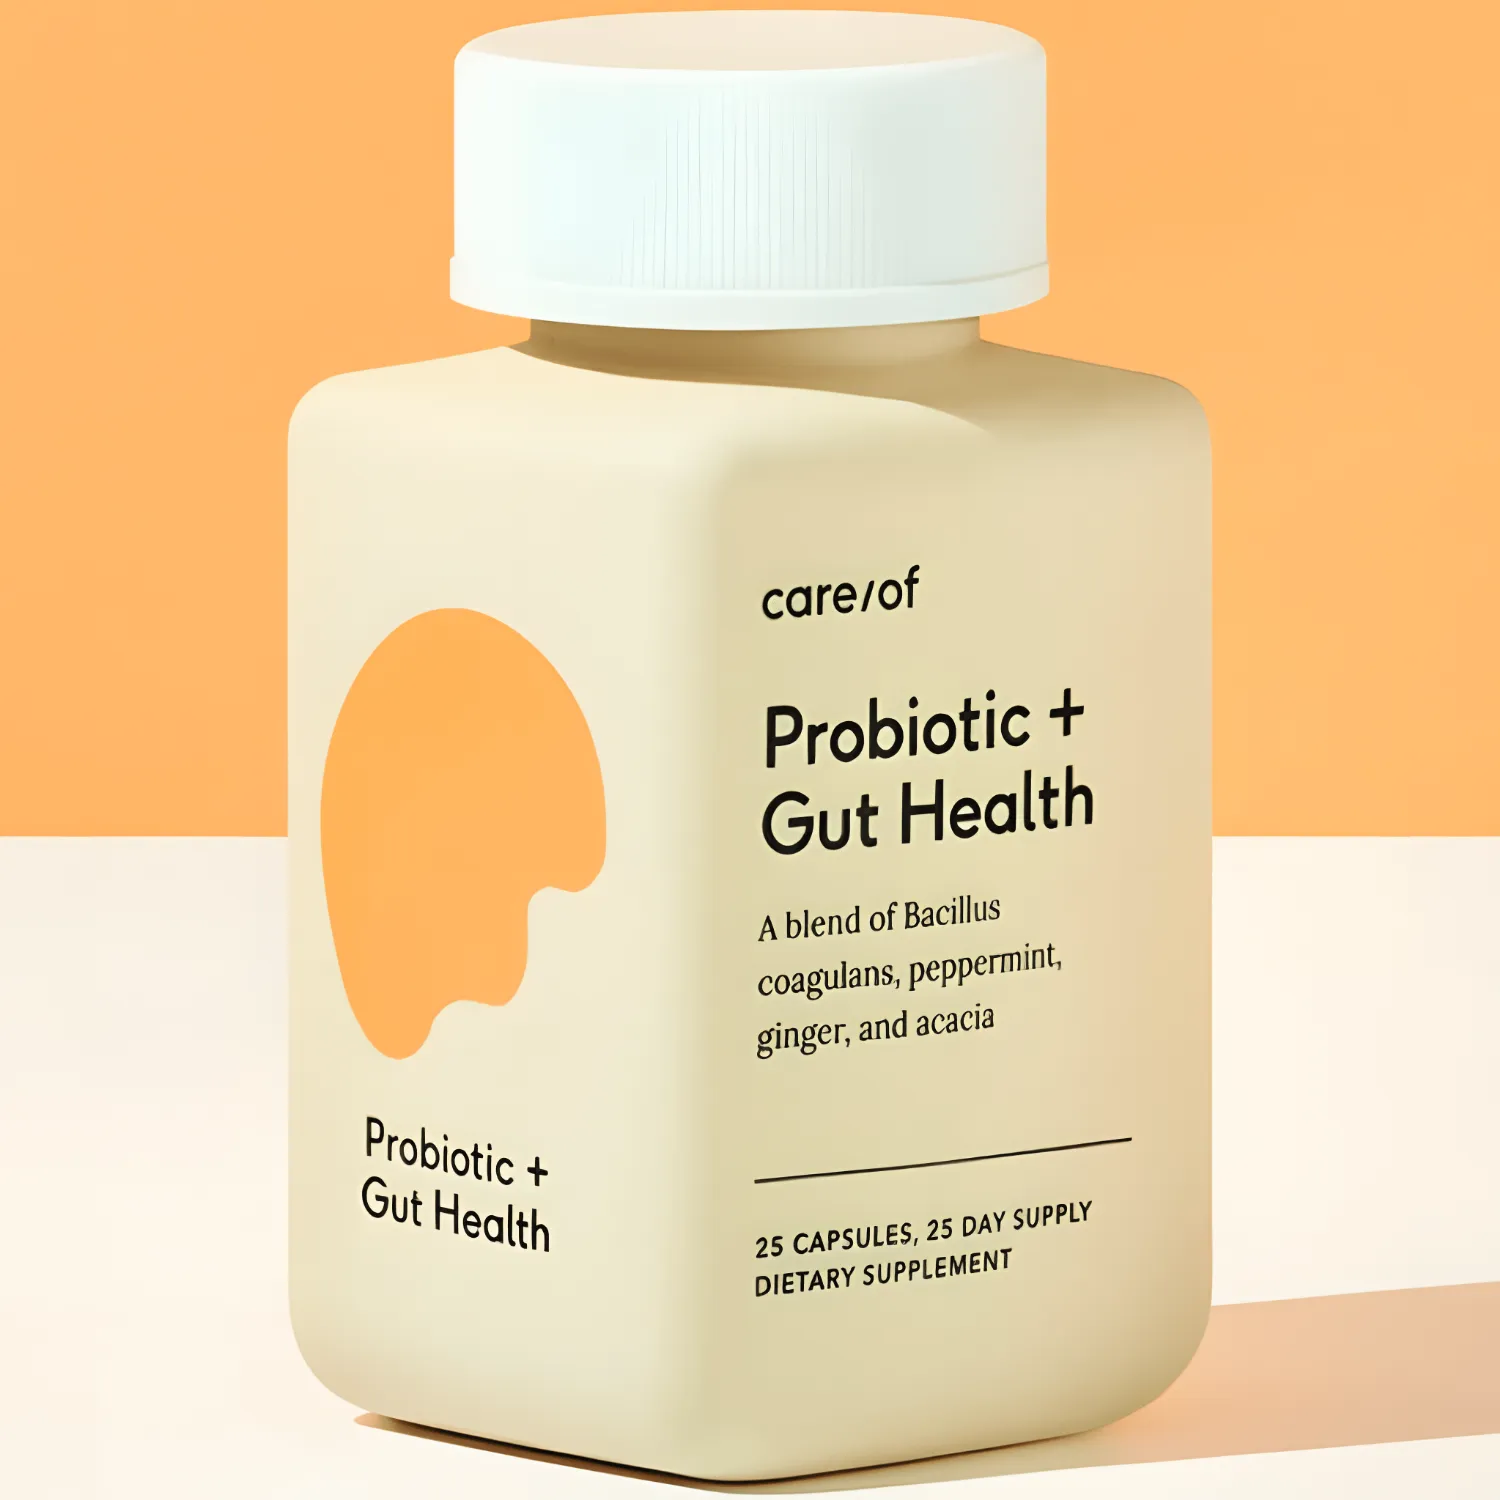 Free Care/Of Probiotic + Gut Health